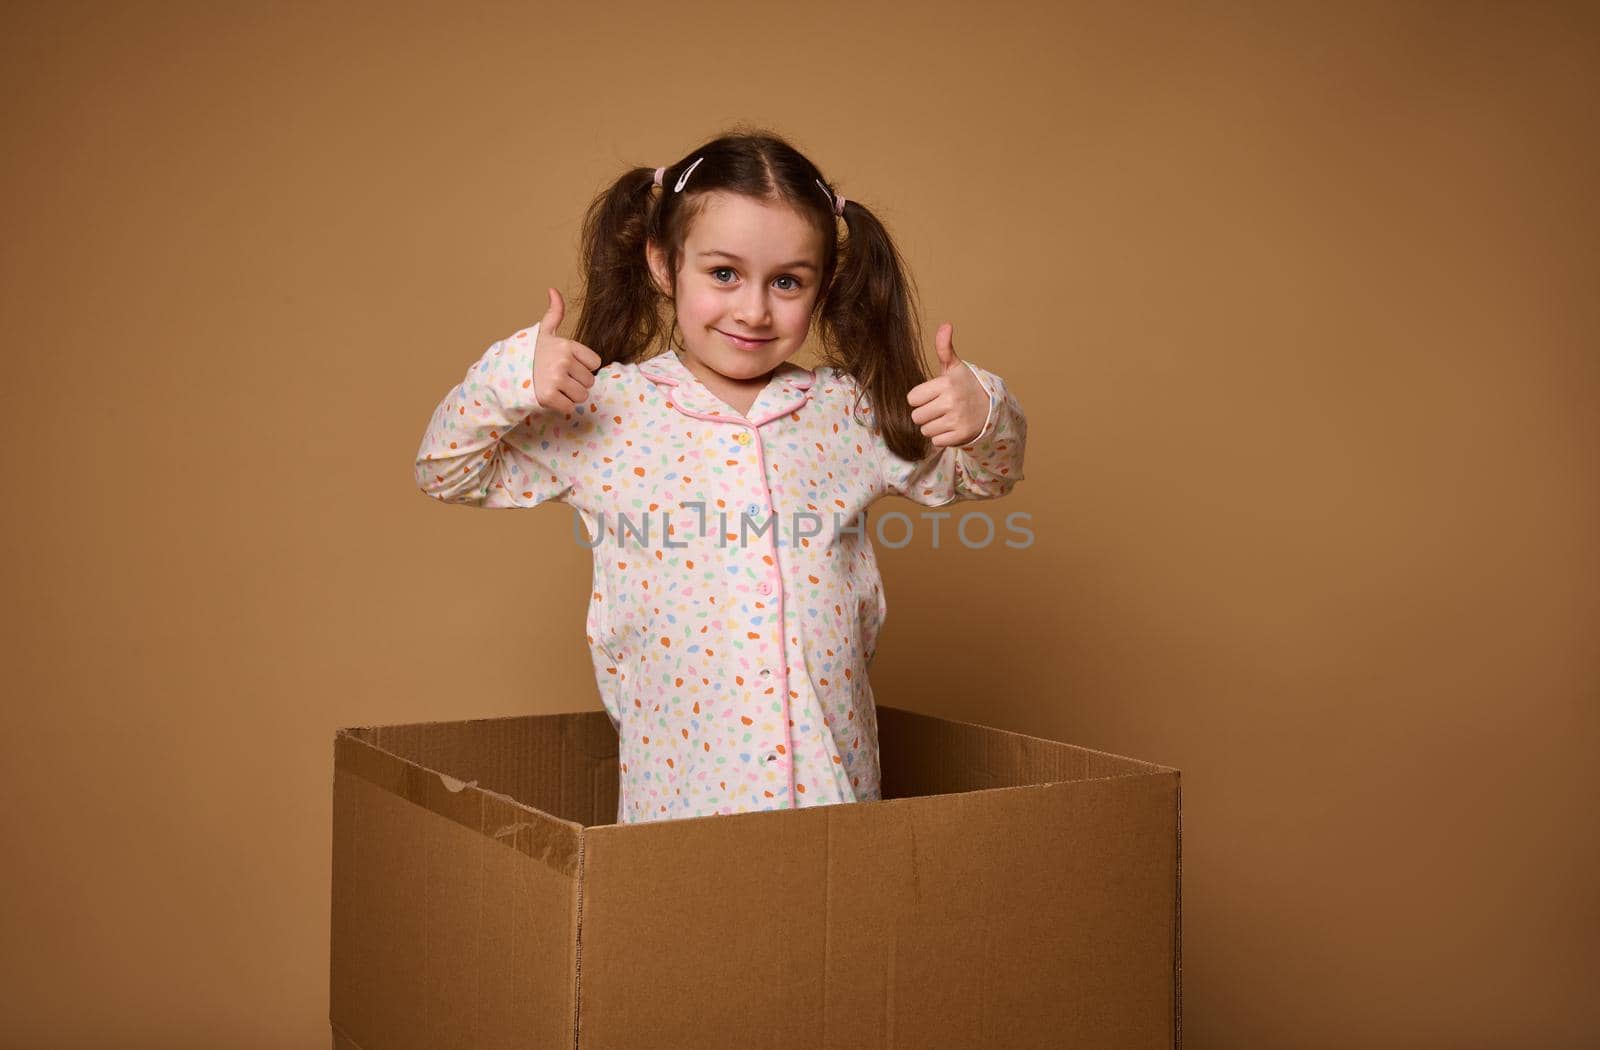 Charming cheerful kid, pretty Caucasian baby girl with two ponytails showing thumbs up, being inside a cardboard box against a beige background with copy ad space